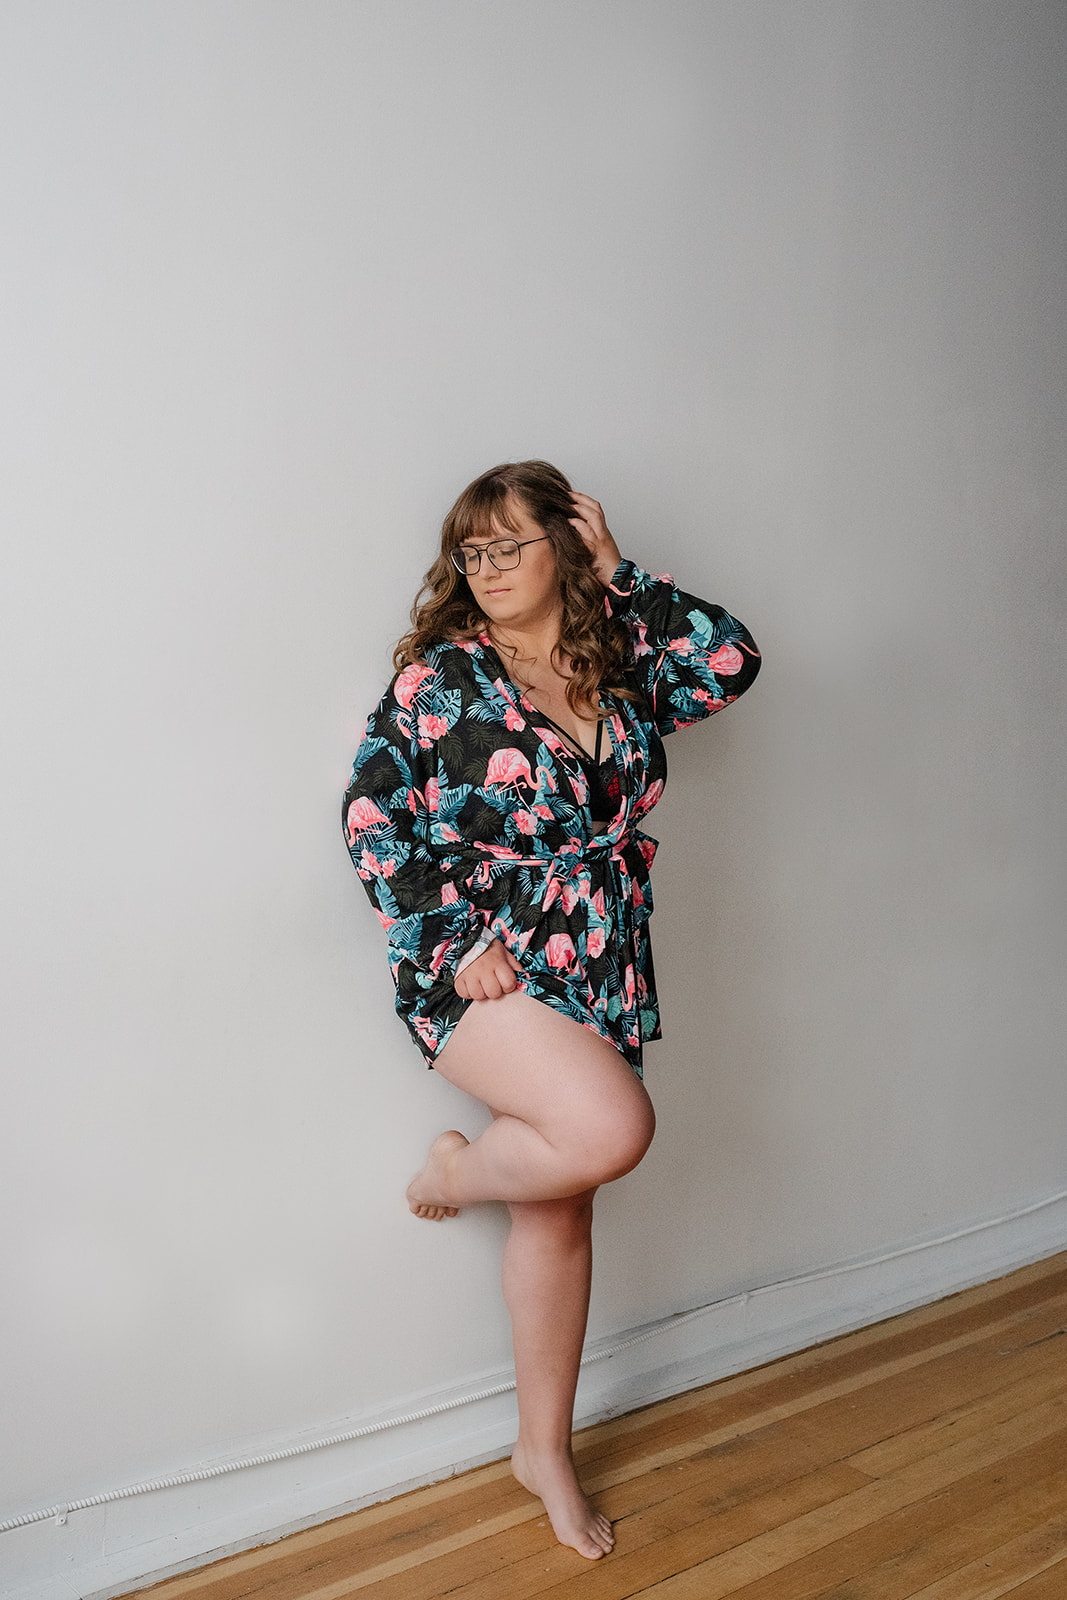 A woman wearing a silk robe during her boudoir photo session